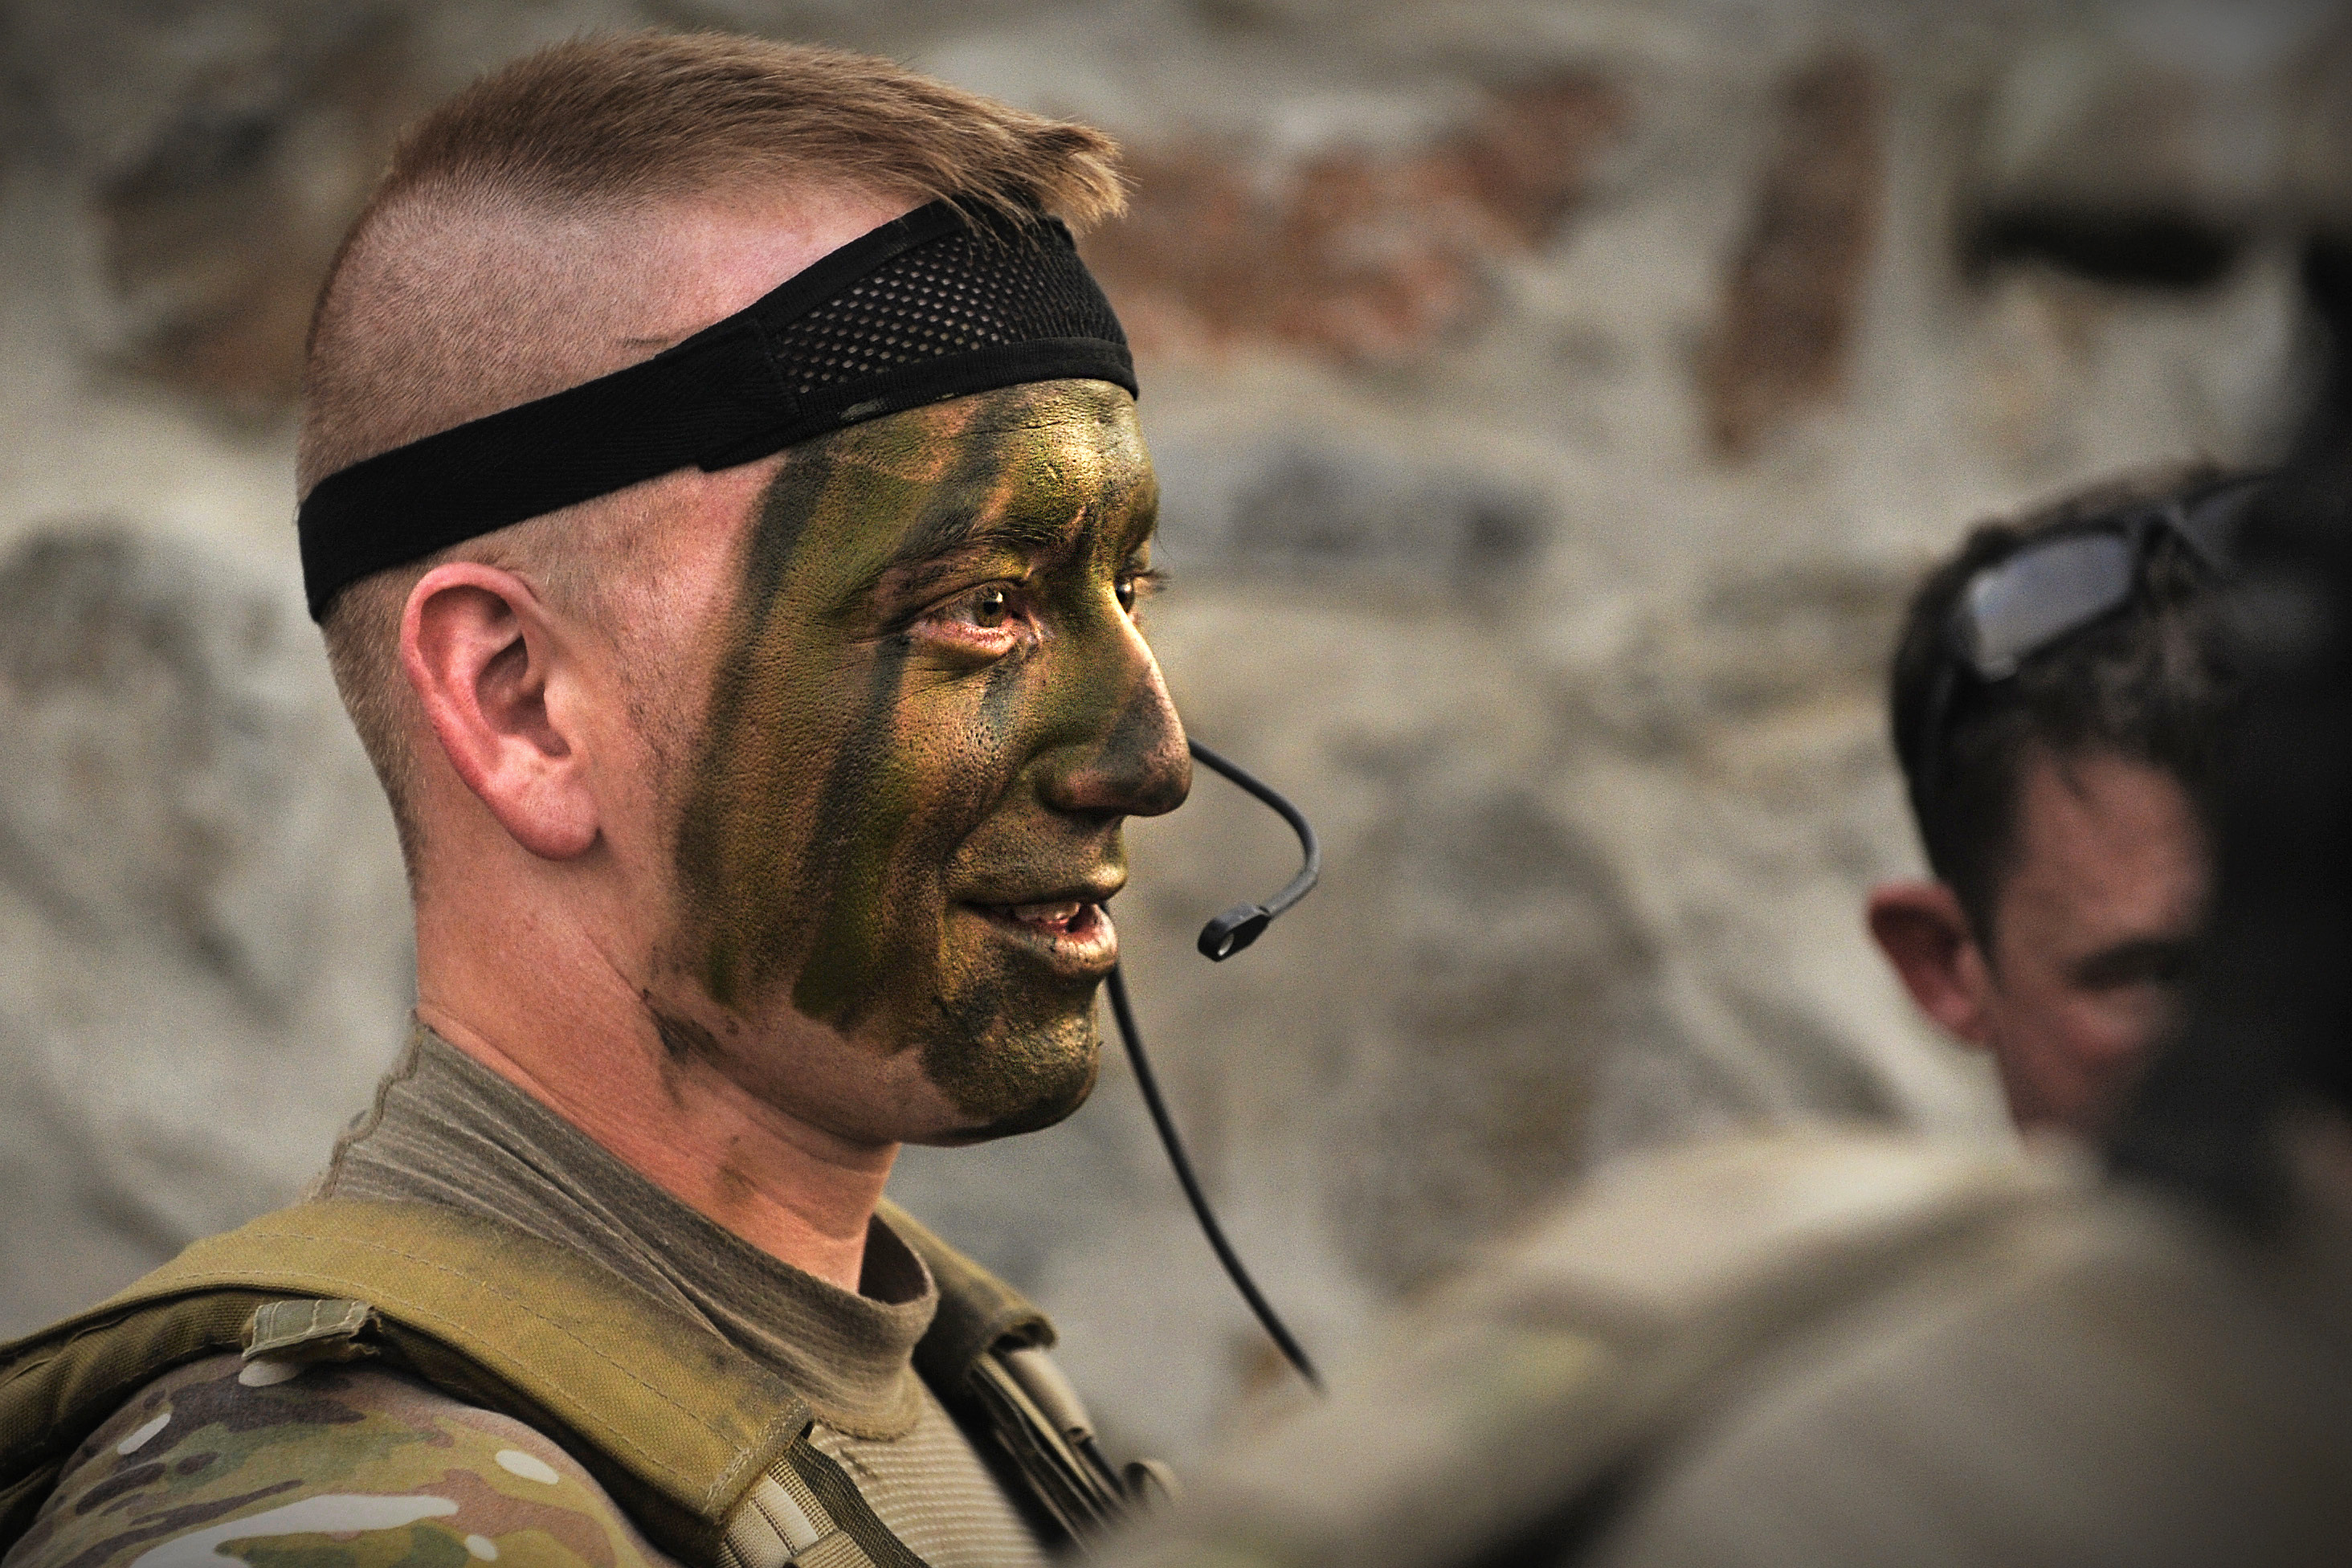 U.S. Army Spc. Dan White watches as fellow soldiers apply camouflage face  paint before an operation